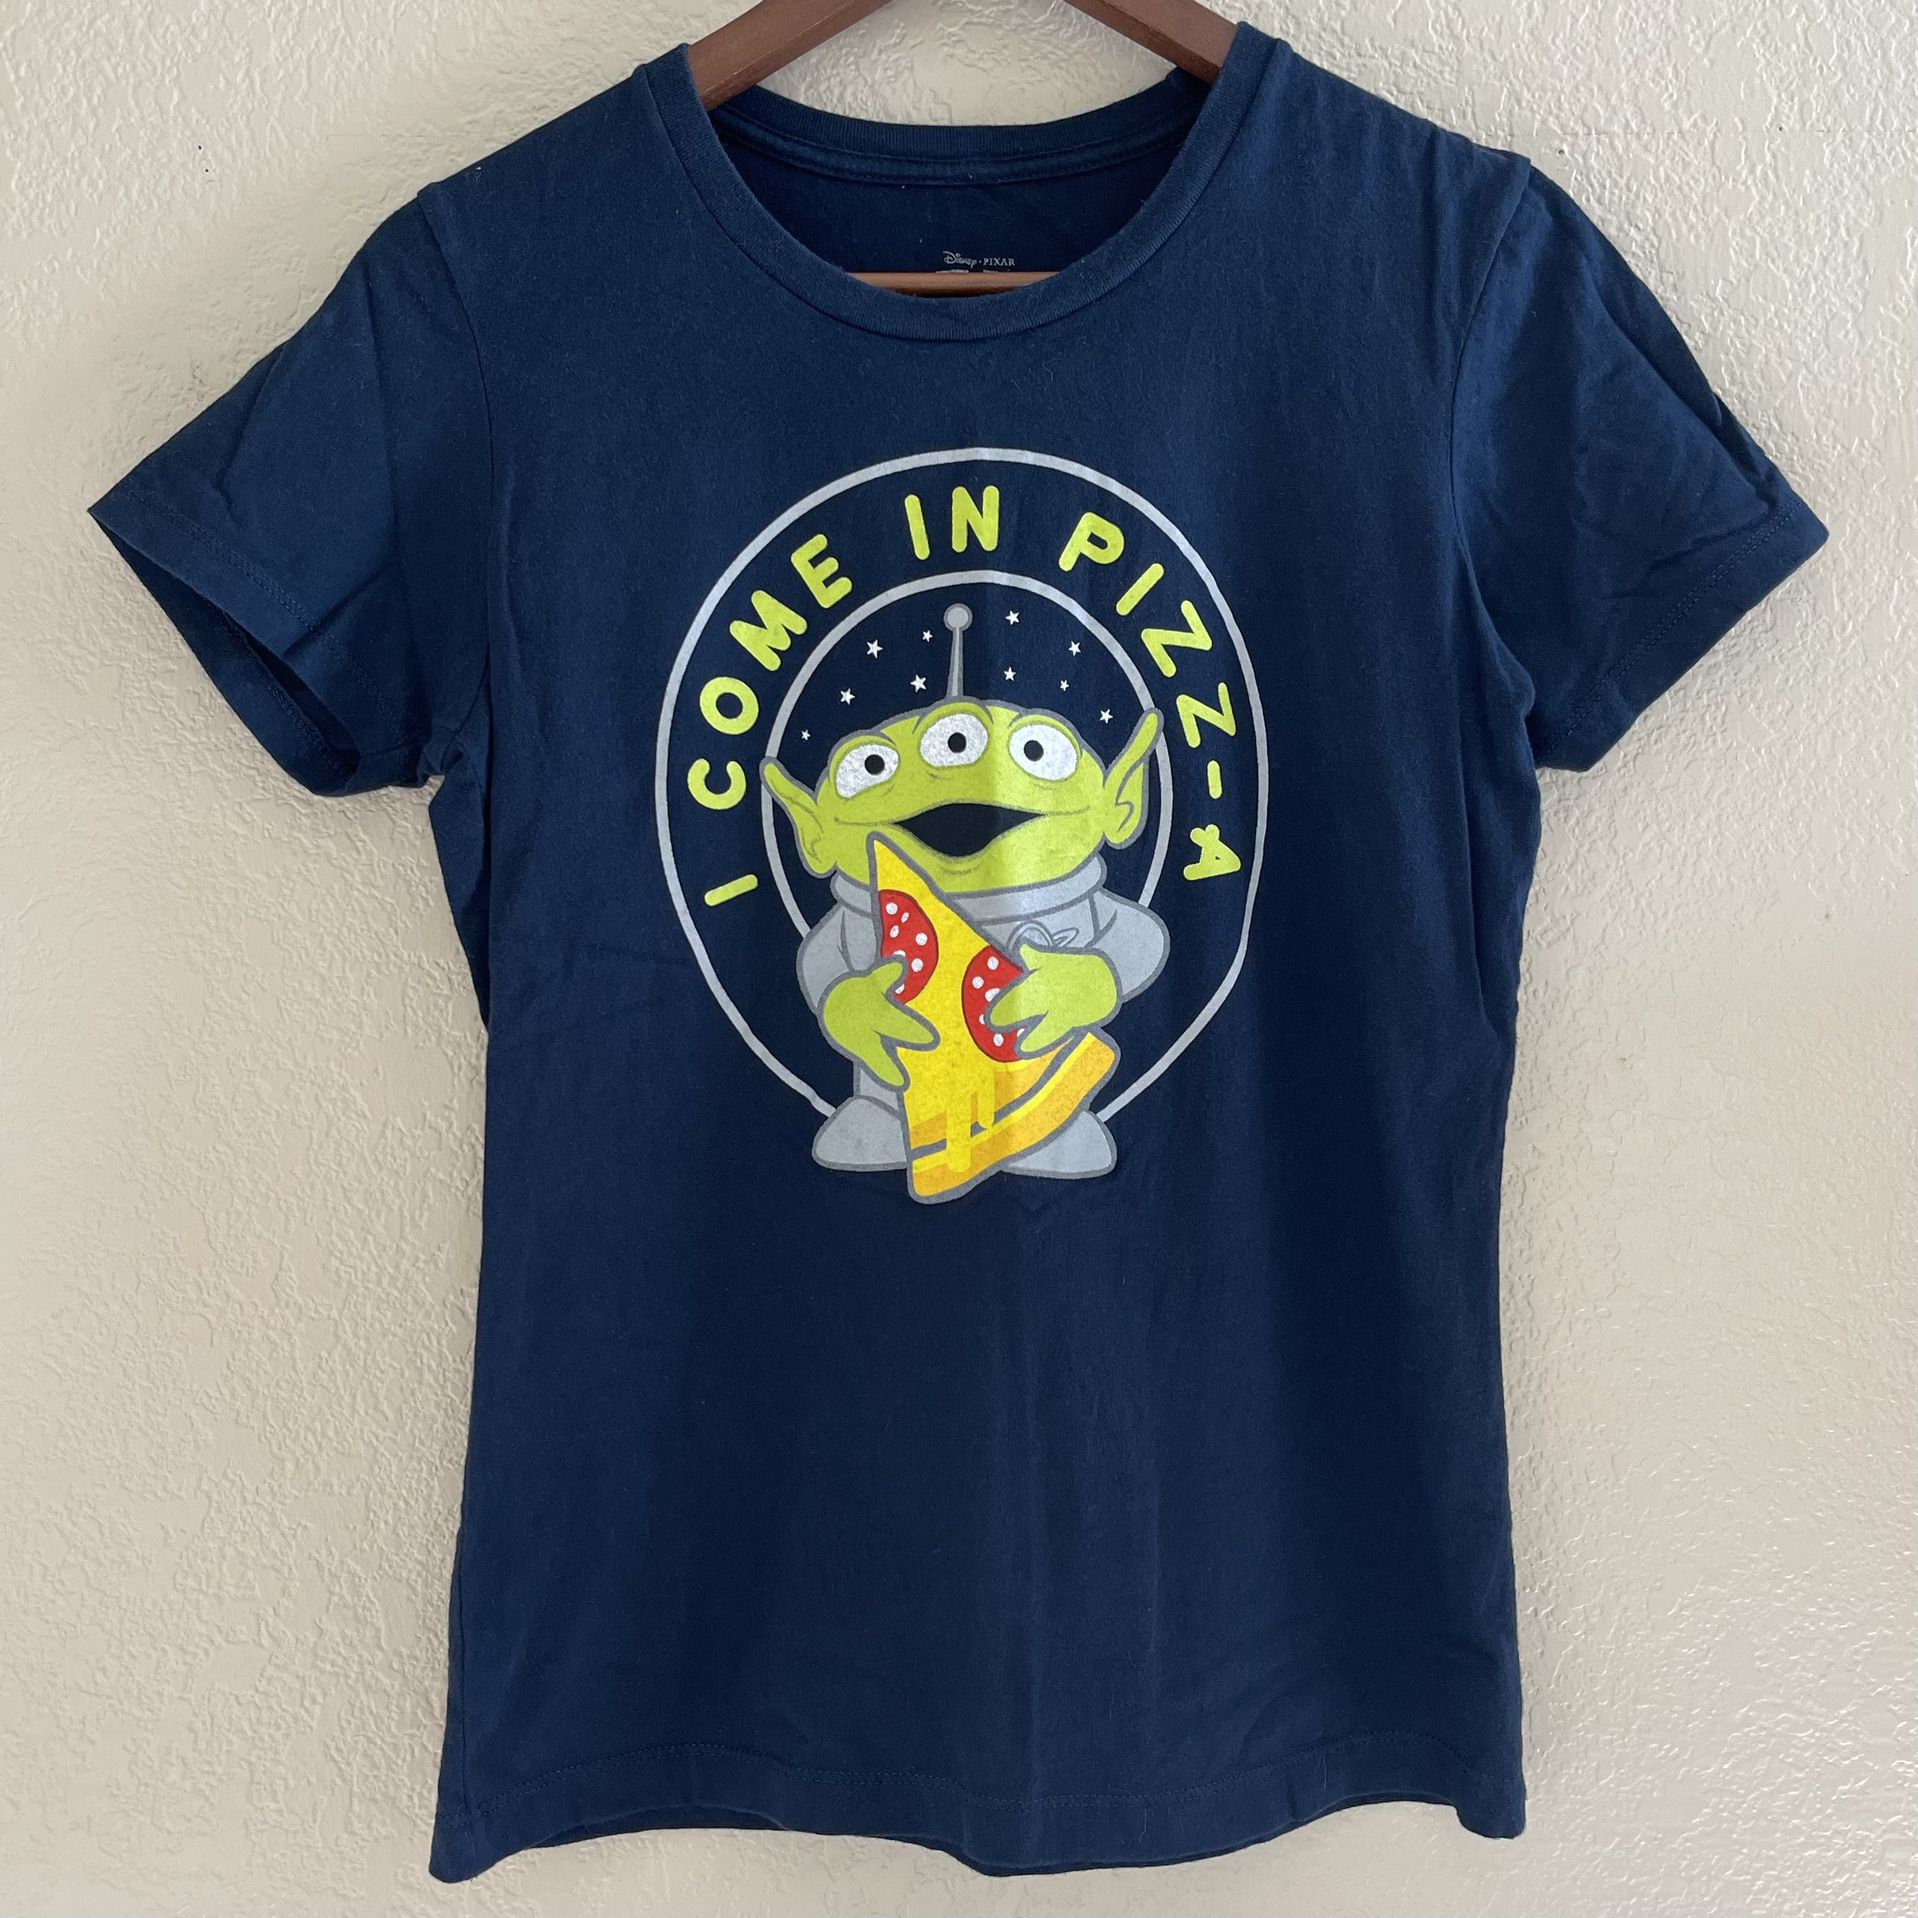 Disney Pixar Toy Story "I Come In Pizza" Alien T-Shirt